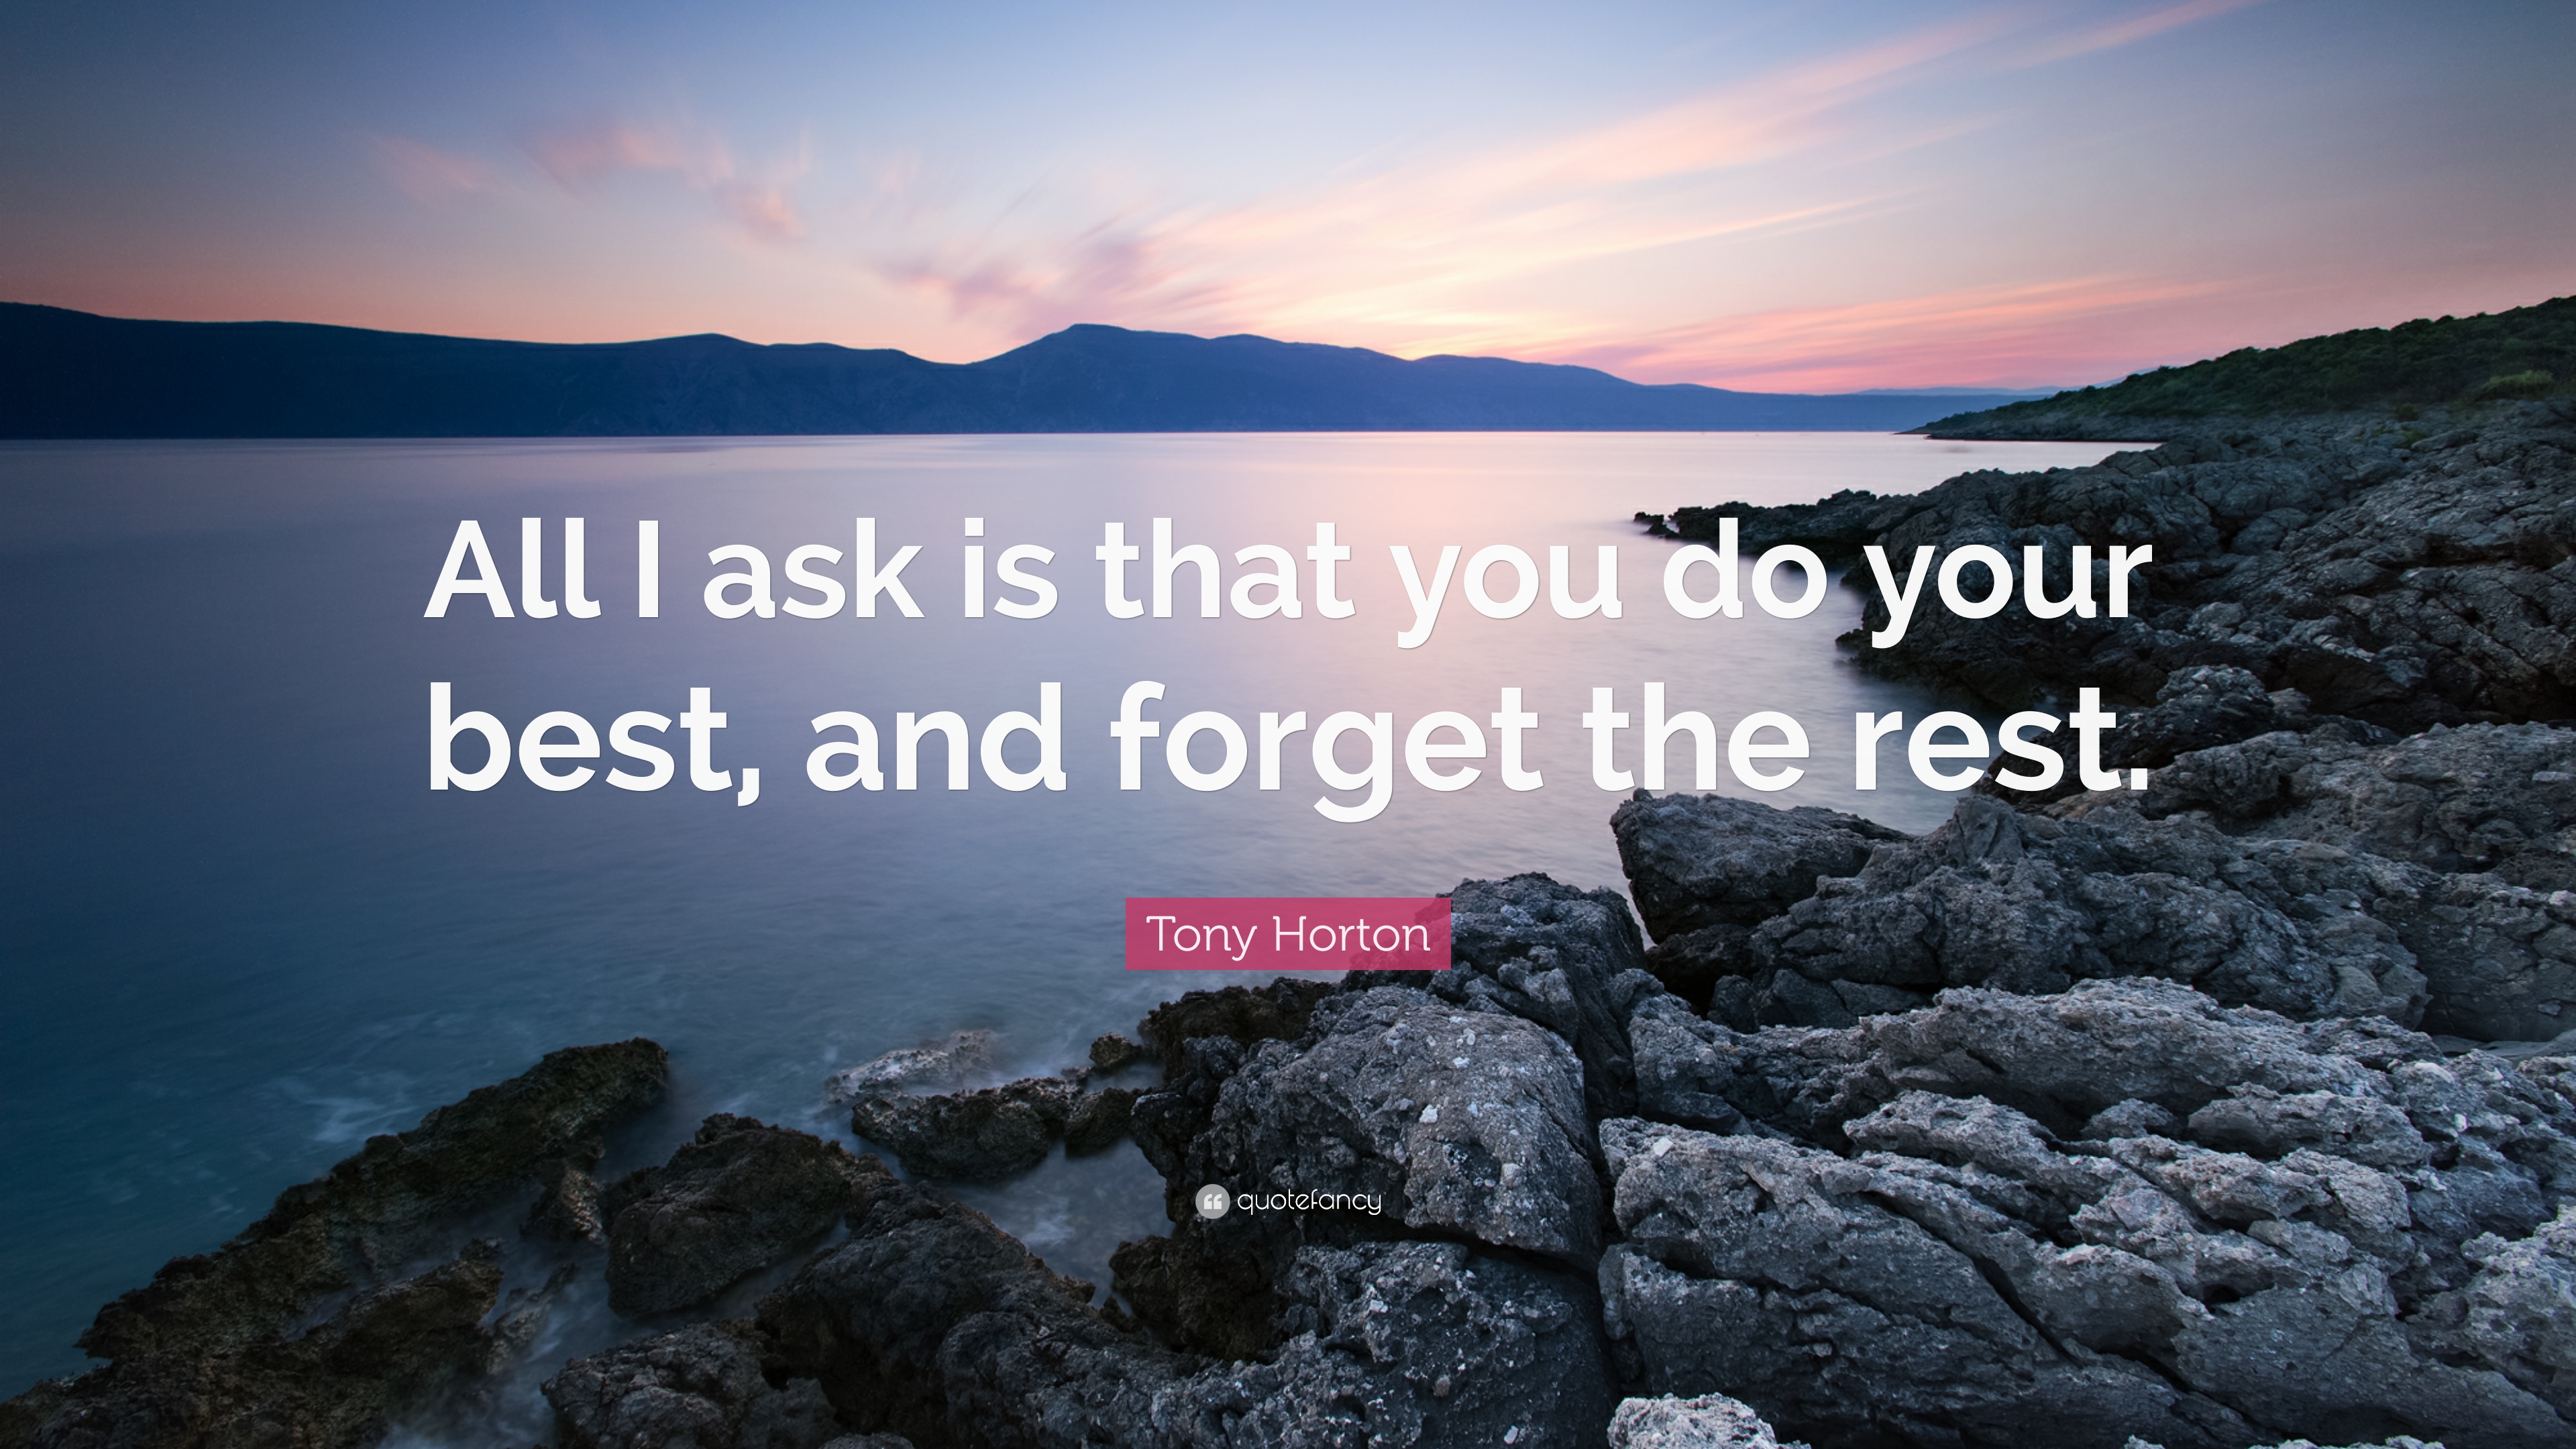 Tony Horton Quote: “All I ask is that you do your best